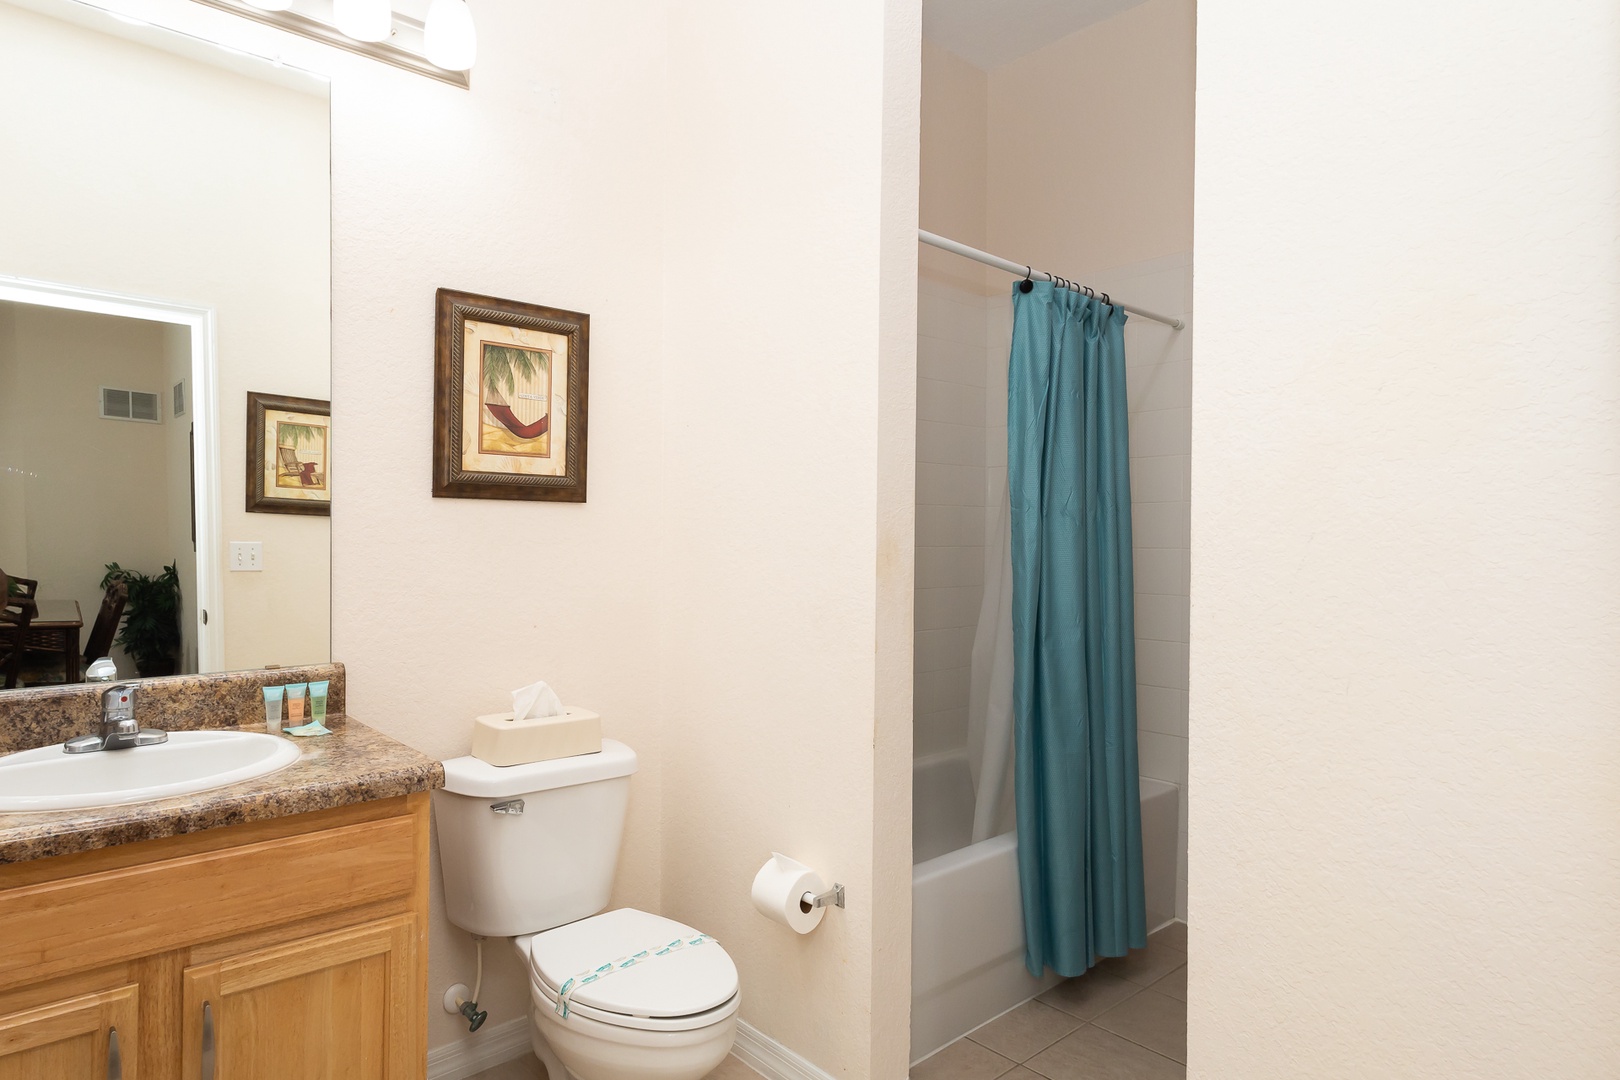 The second full en suite includes a single vanity & shower/tub combo